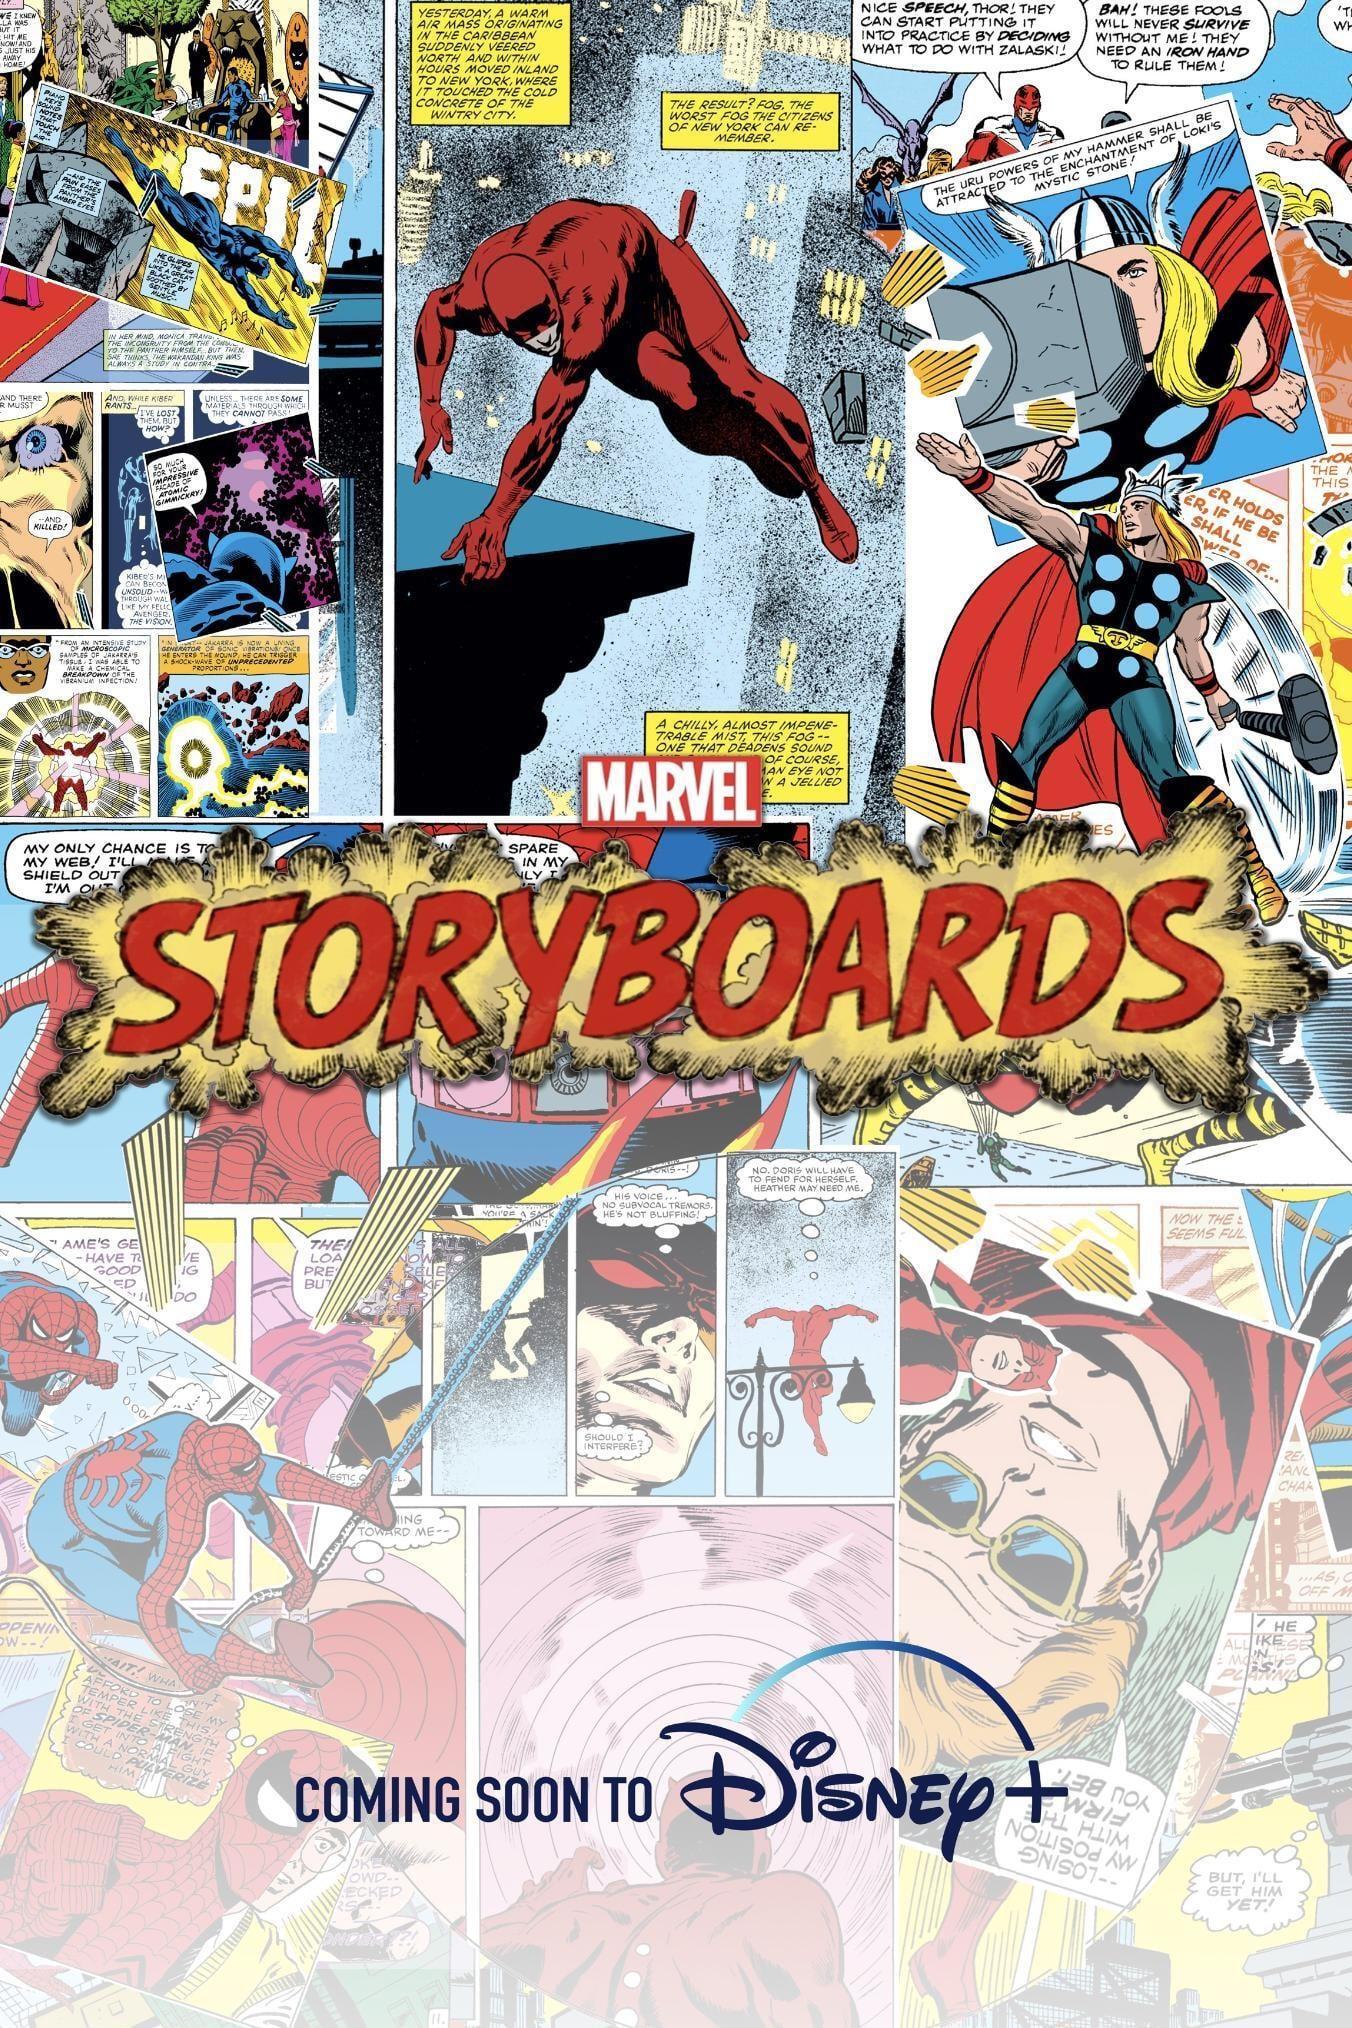 TV ratings for Marvel’s Storyboards in Alemania. Disney+ TV series